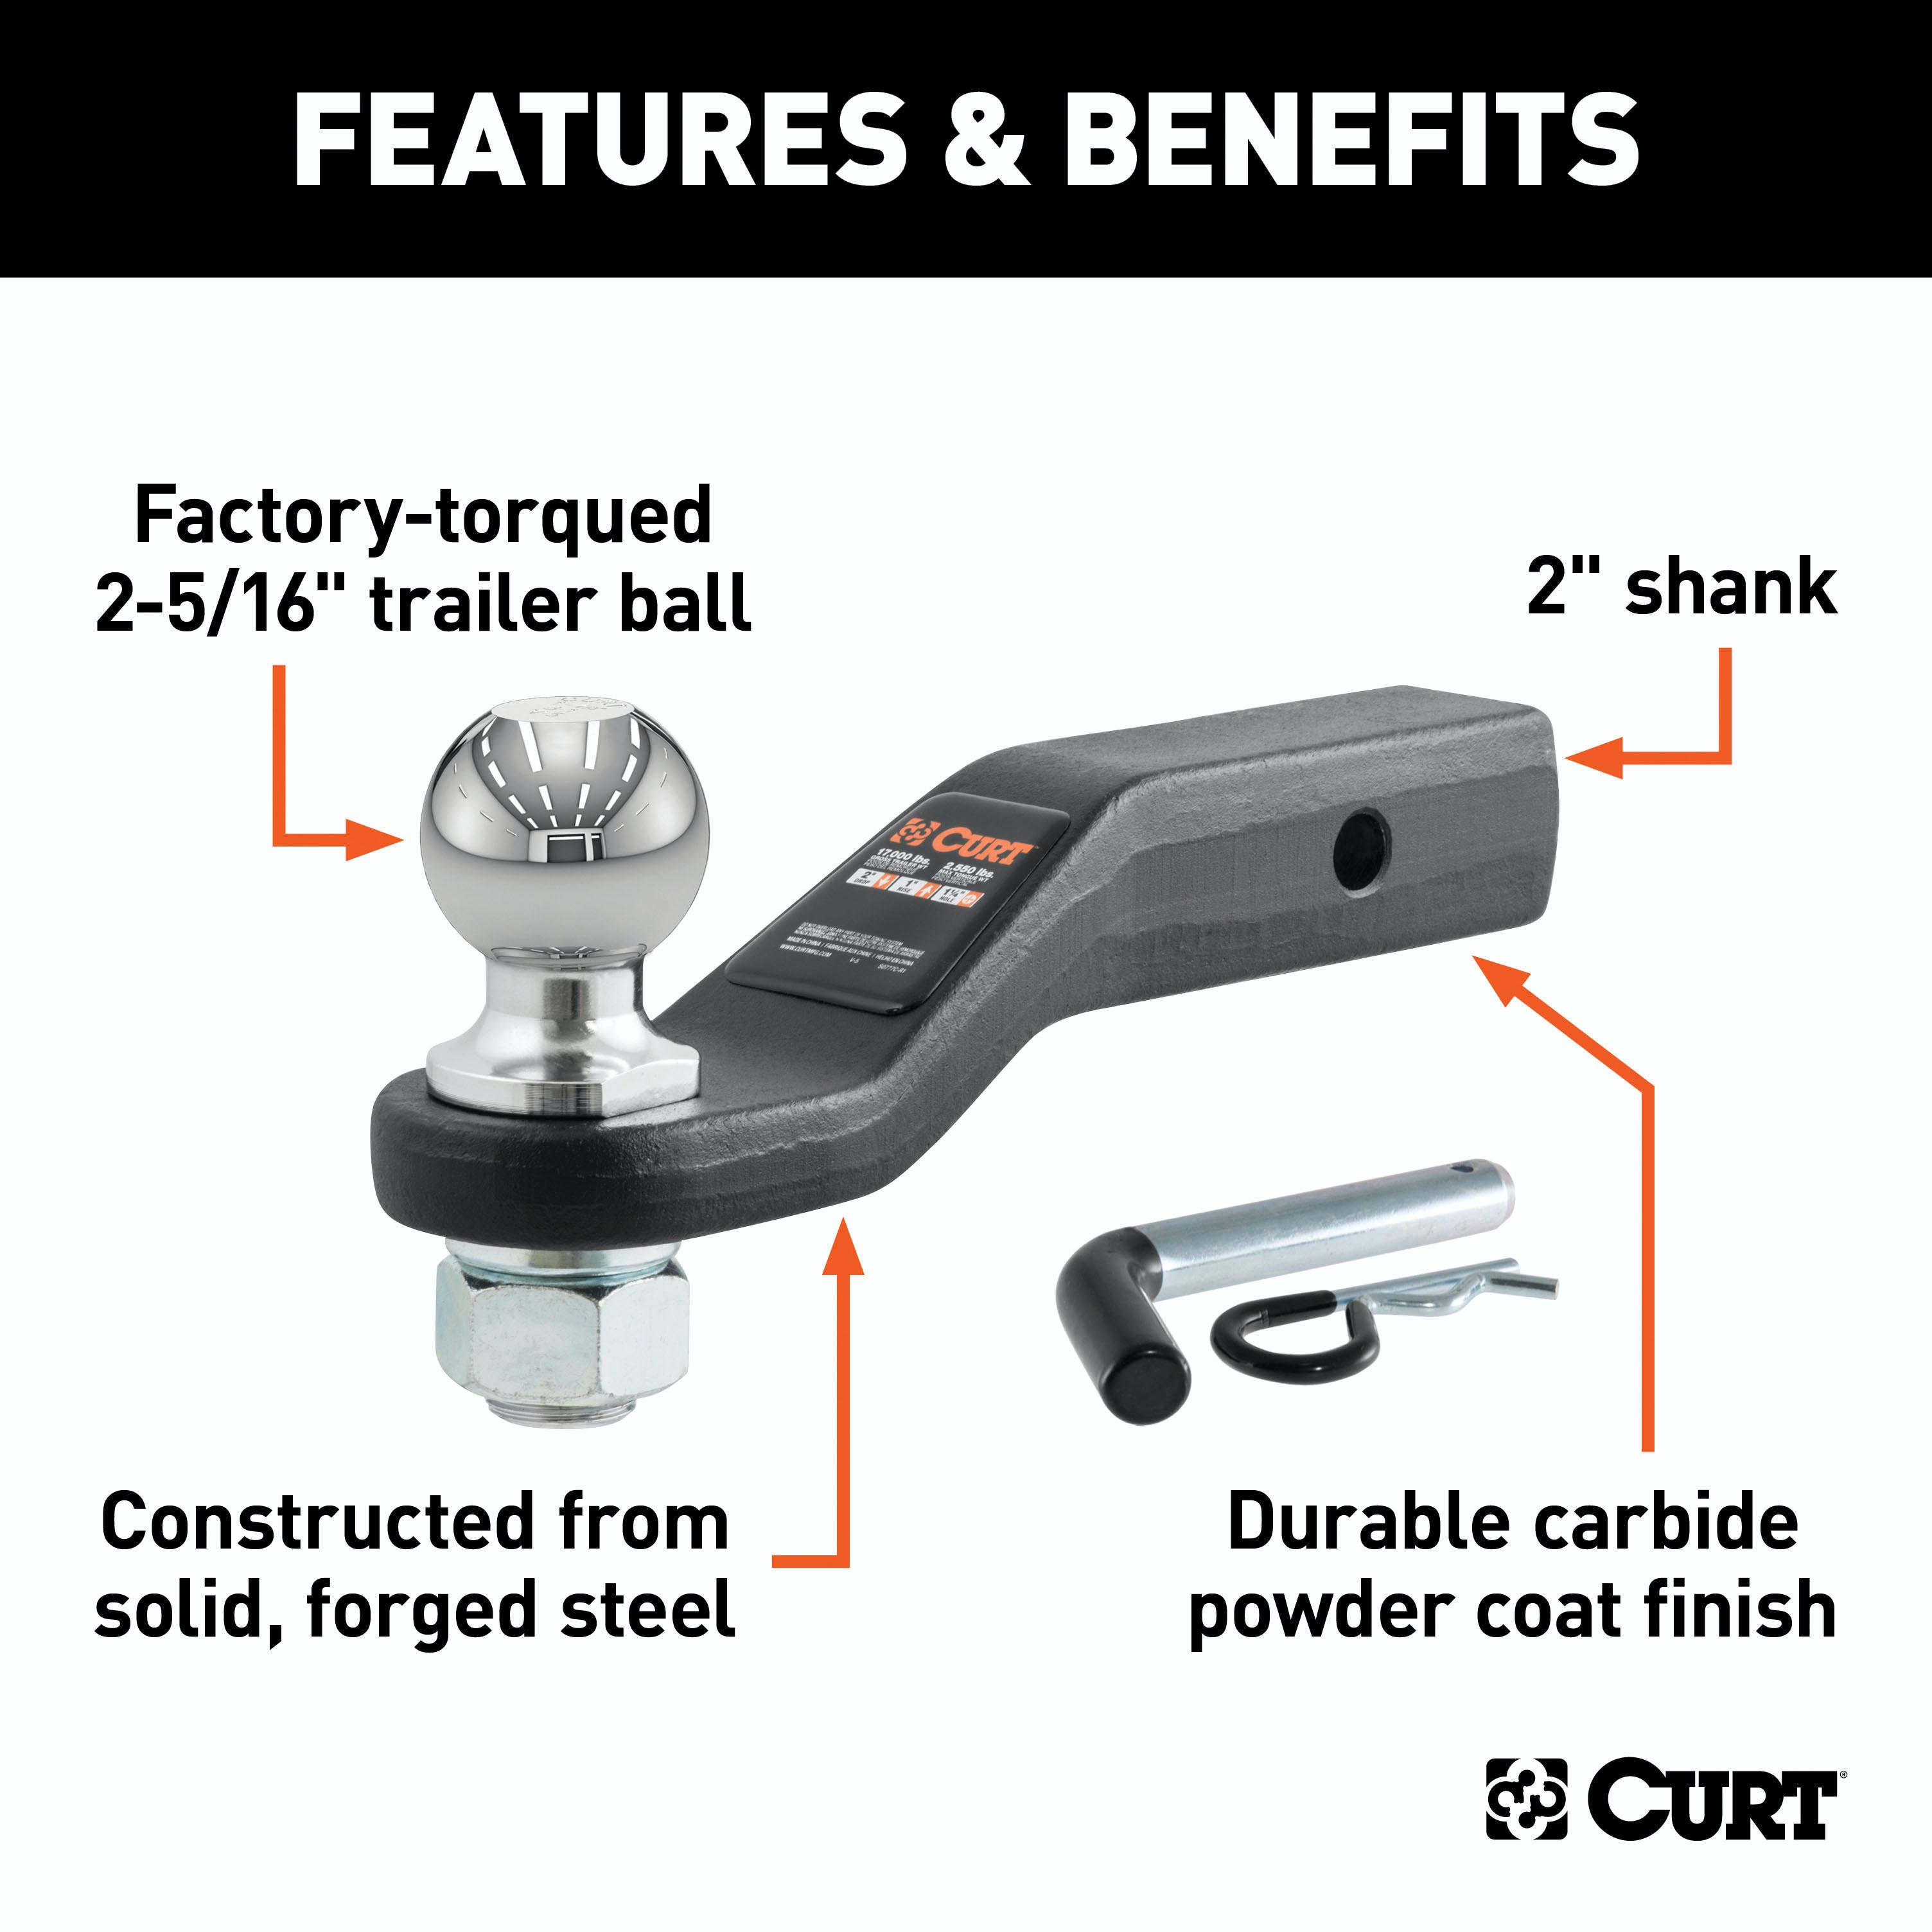 CURT 45331 Loaded Forged Ball Mount with 2-5/16 Ball (2 Shank, 15,000 lbs., 2 Drop)